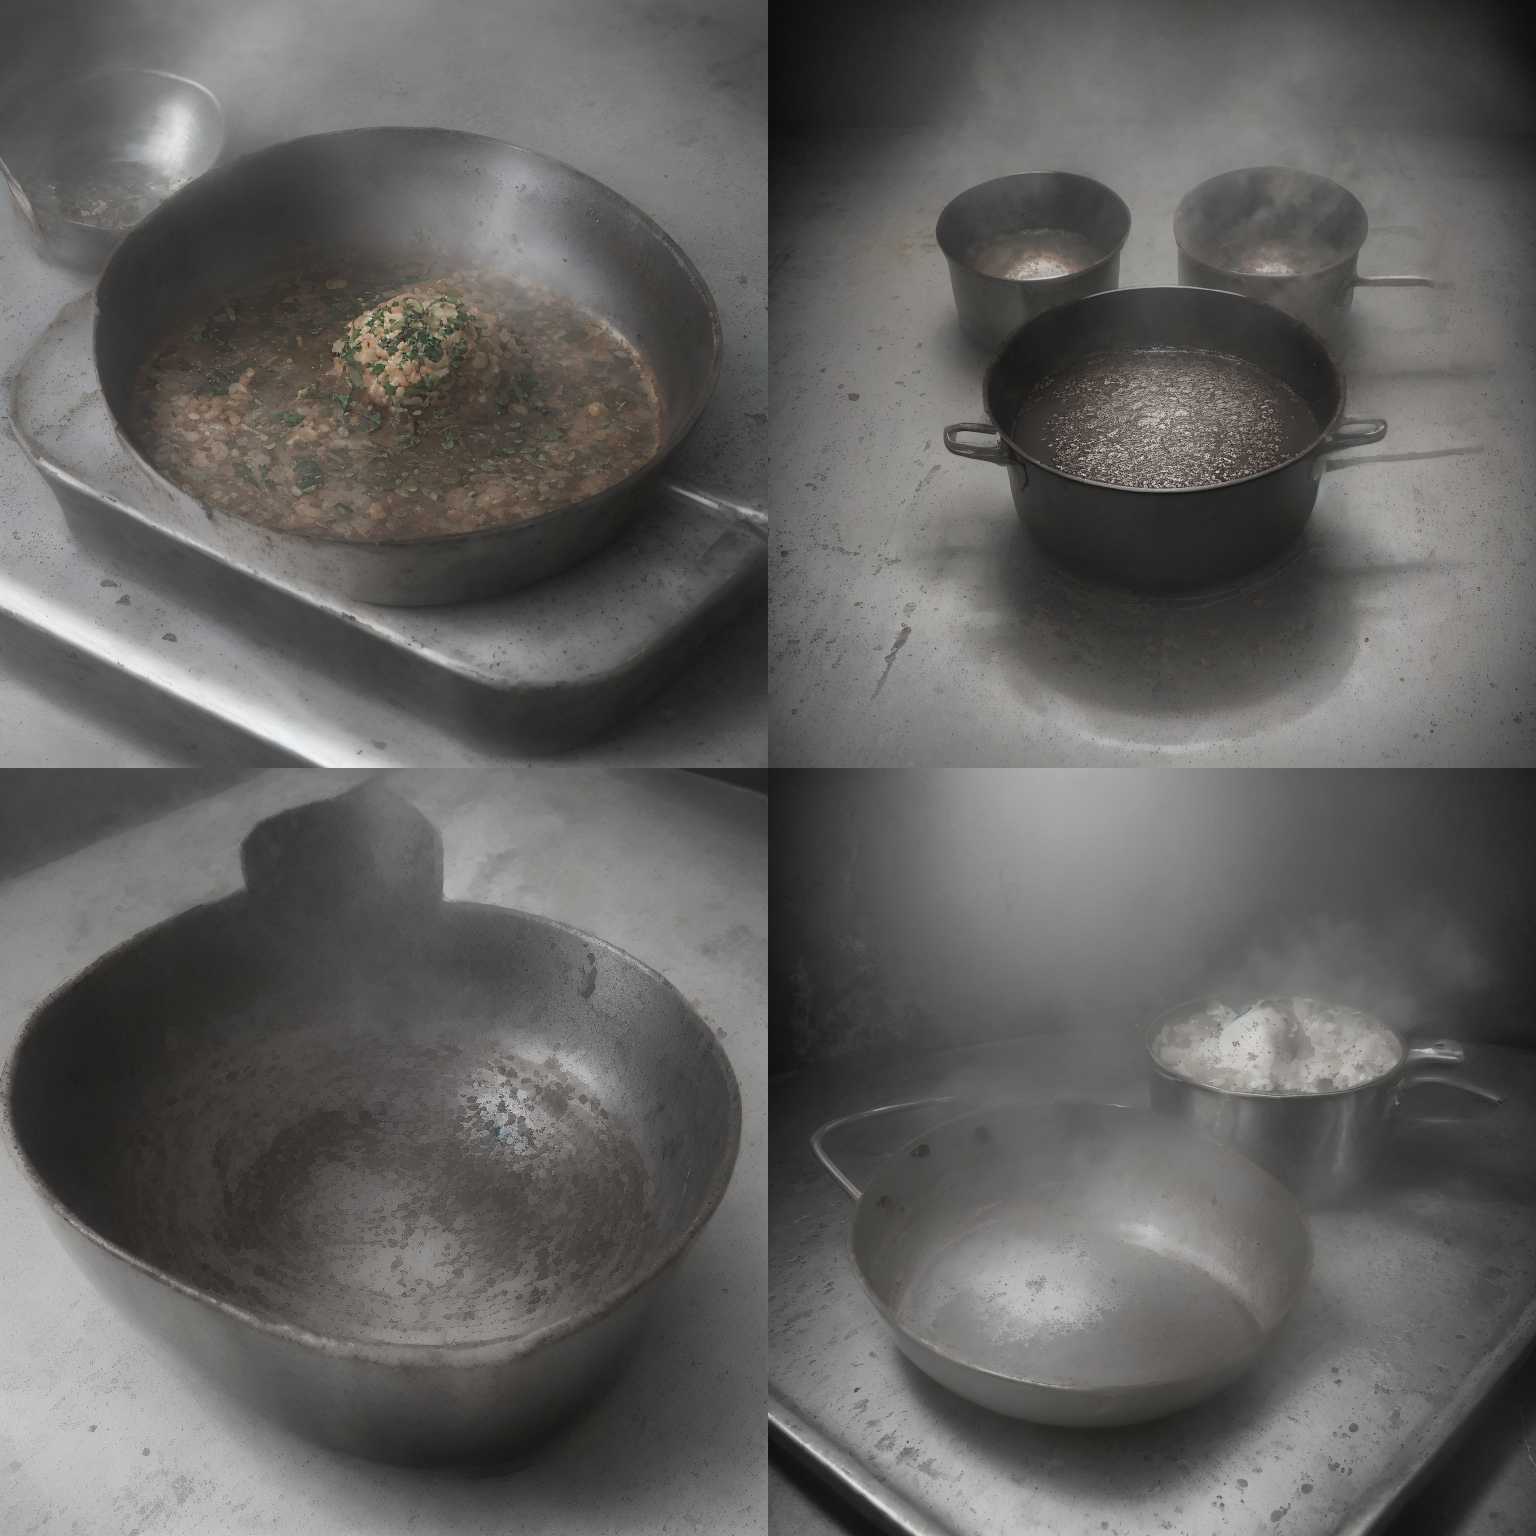 An empty pan heated for a long time